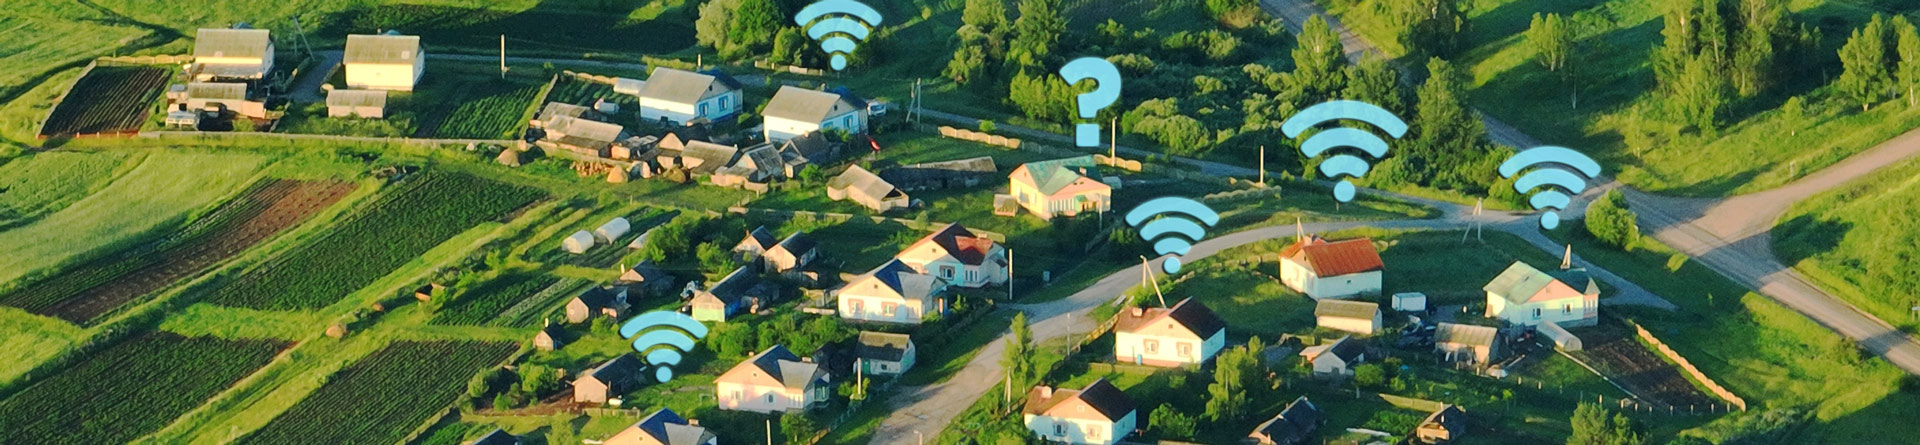 houses with broadband symbols on the roof